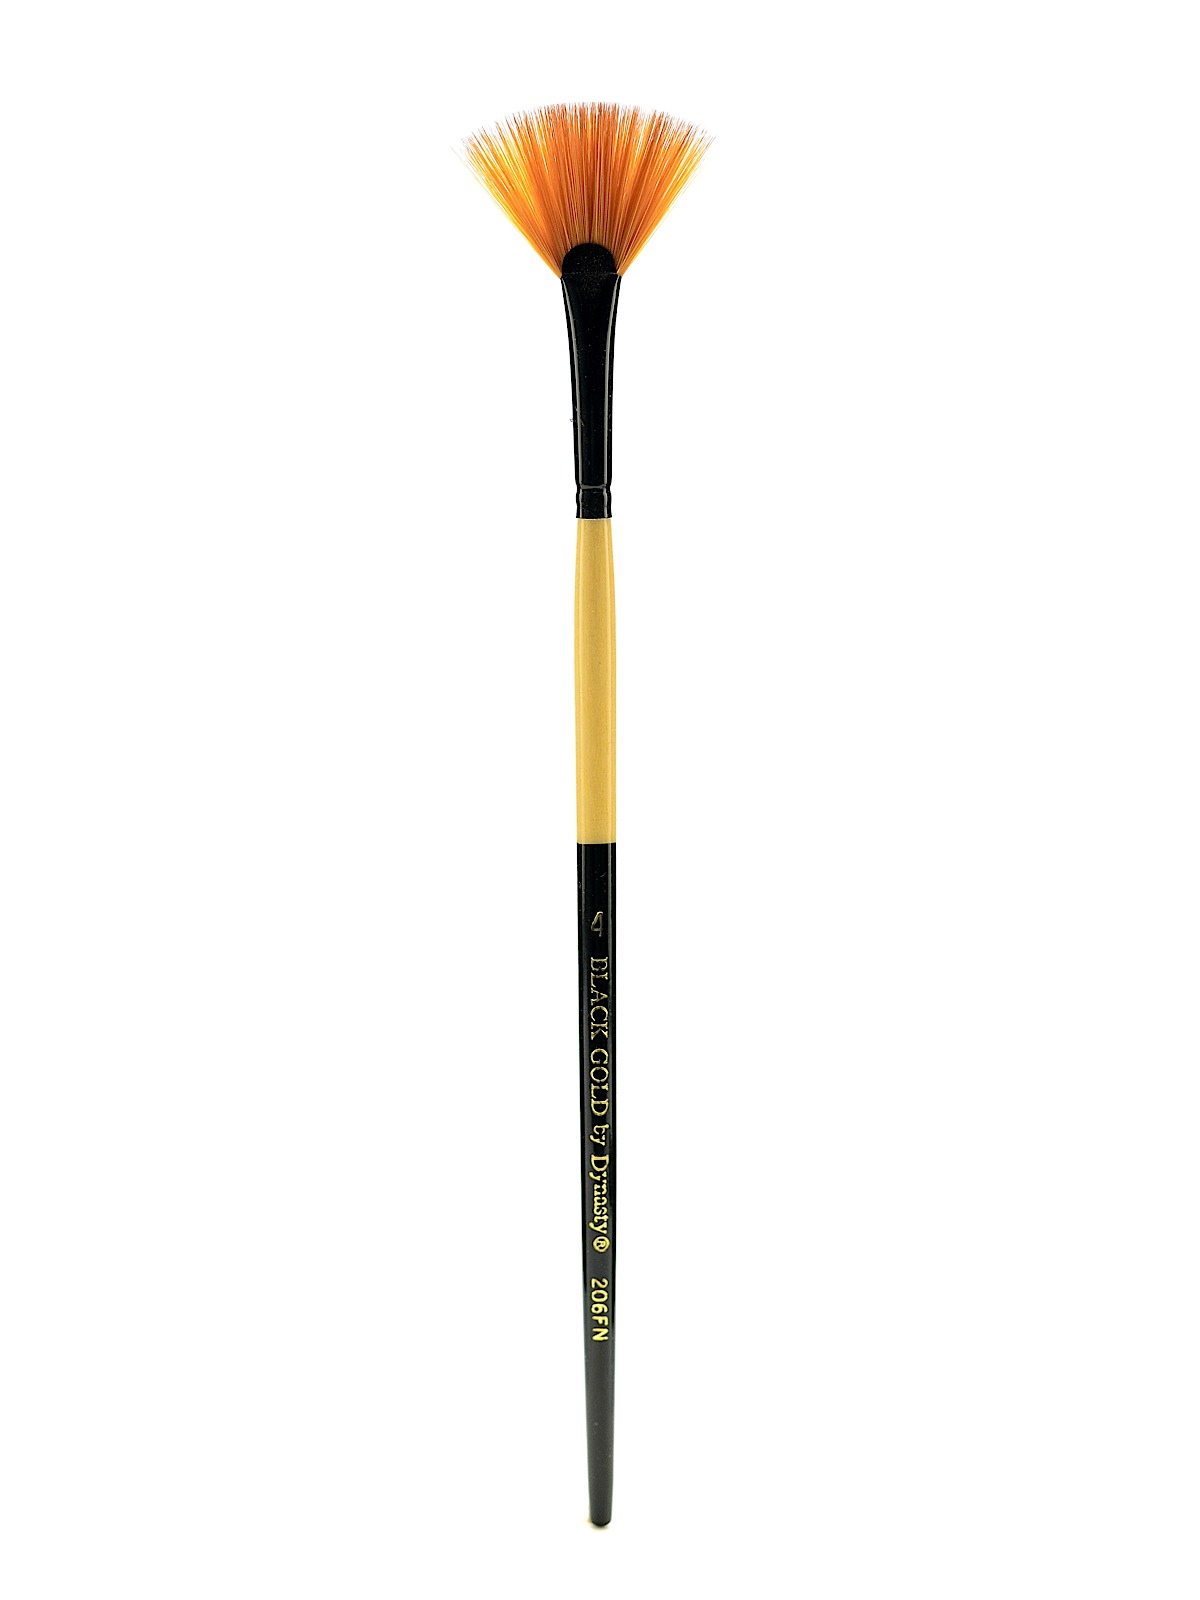 Black Gold Series Synthetic Brushes Short Handle 4 Fan